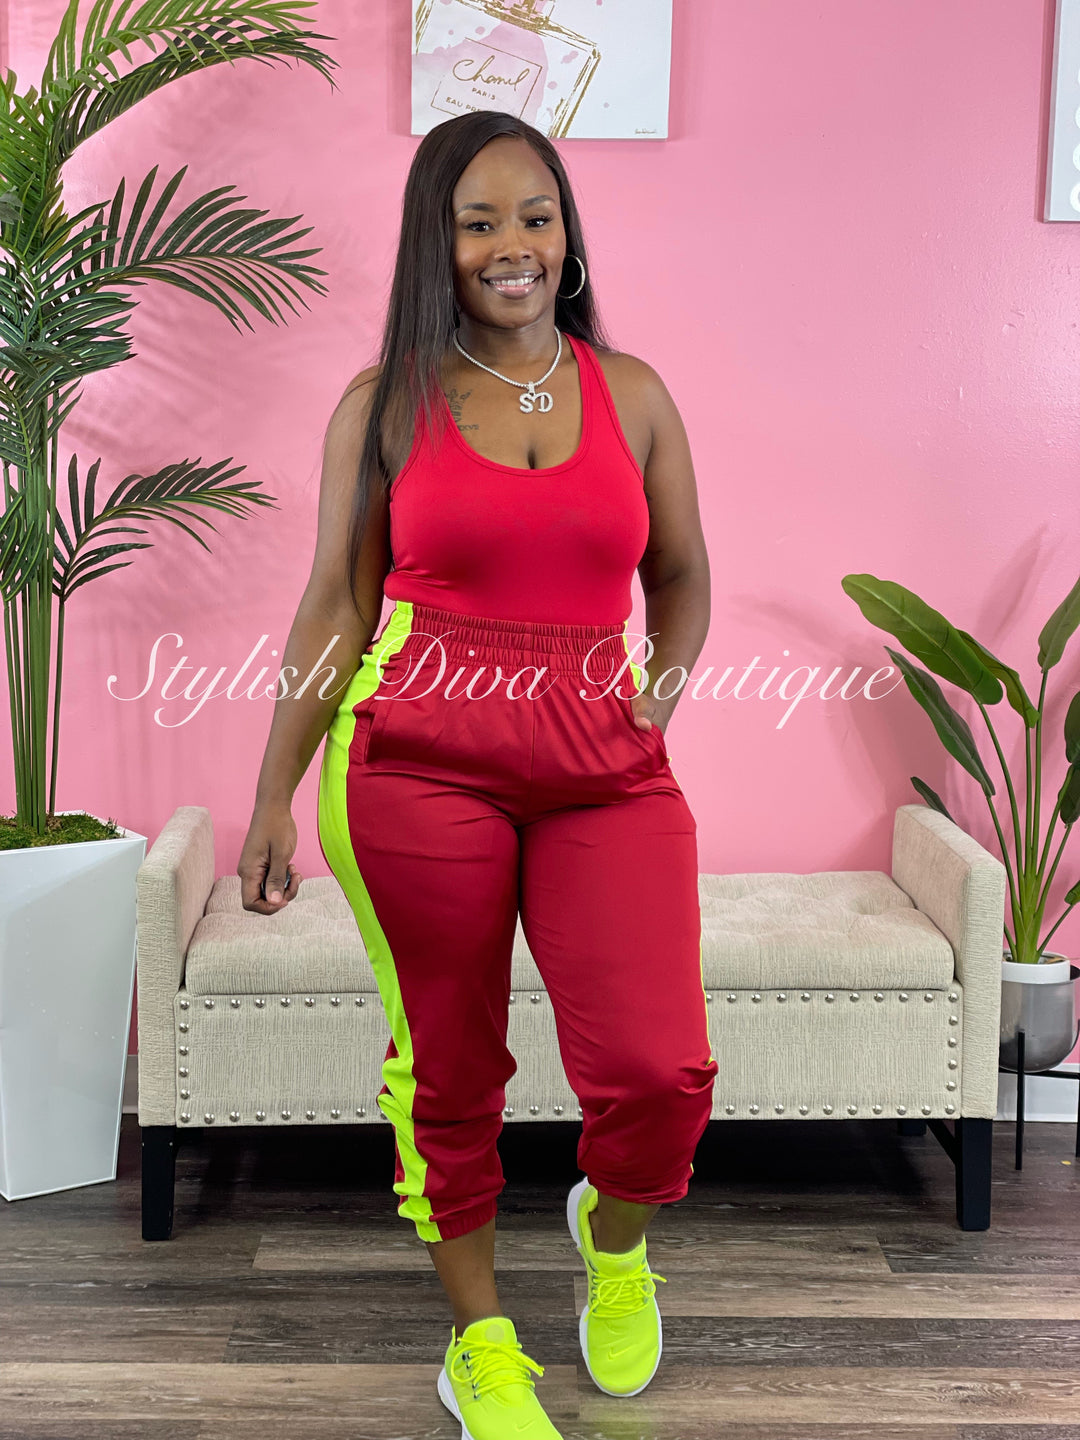 Easy Does It Jogger Set up to 3XL (Dk Red/Neon Lime)